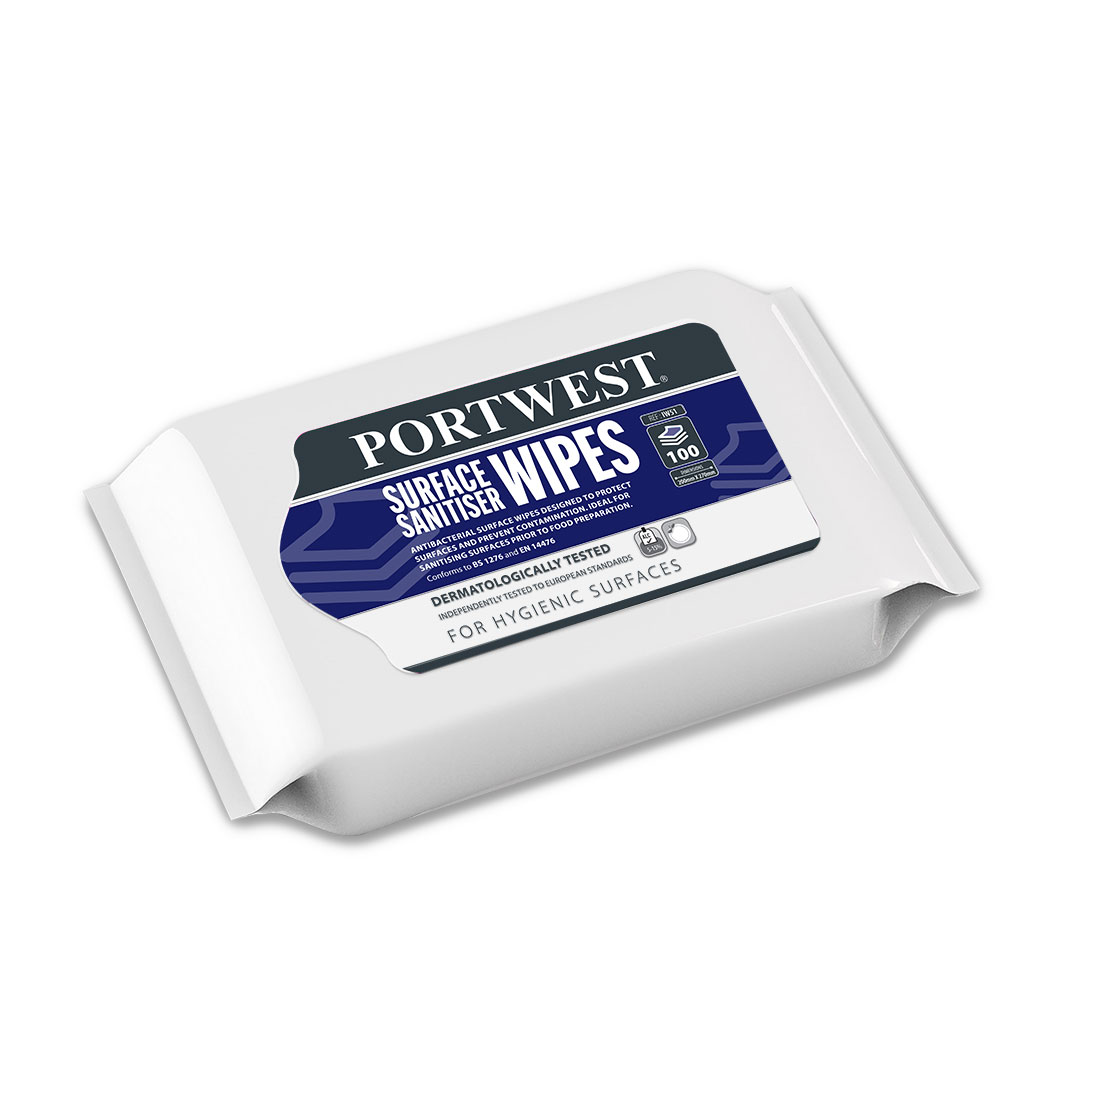 Portwest Surface Wipes 